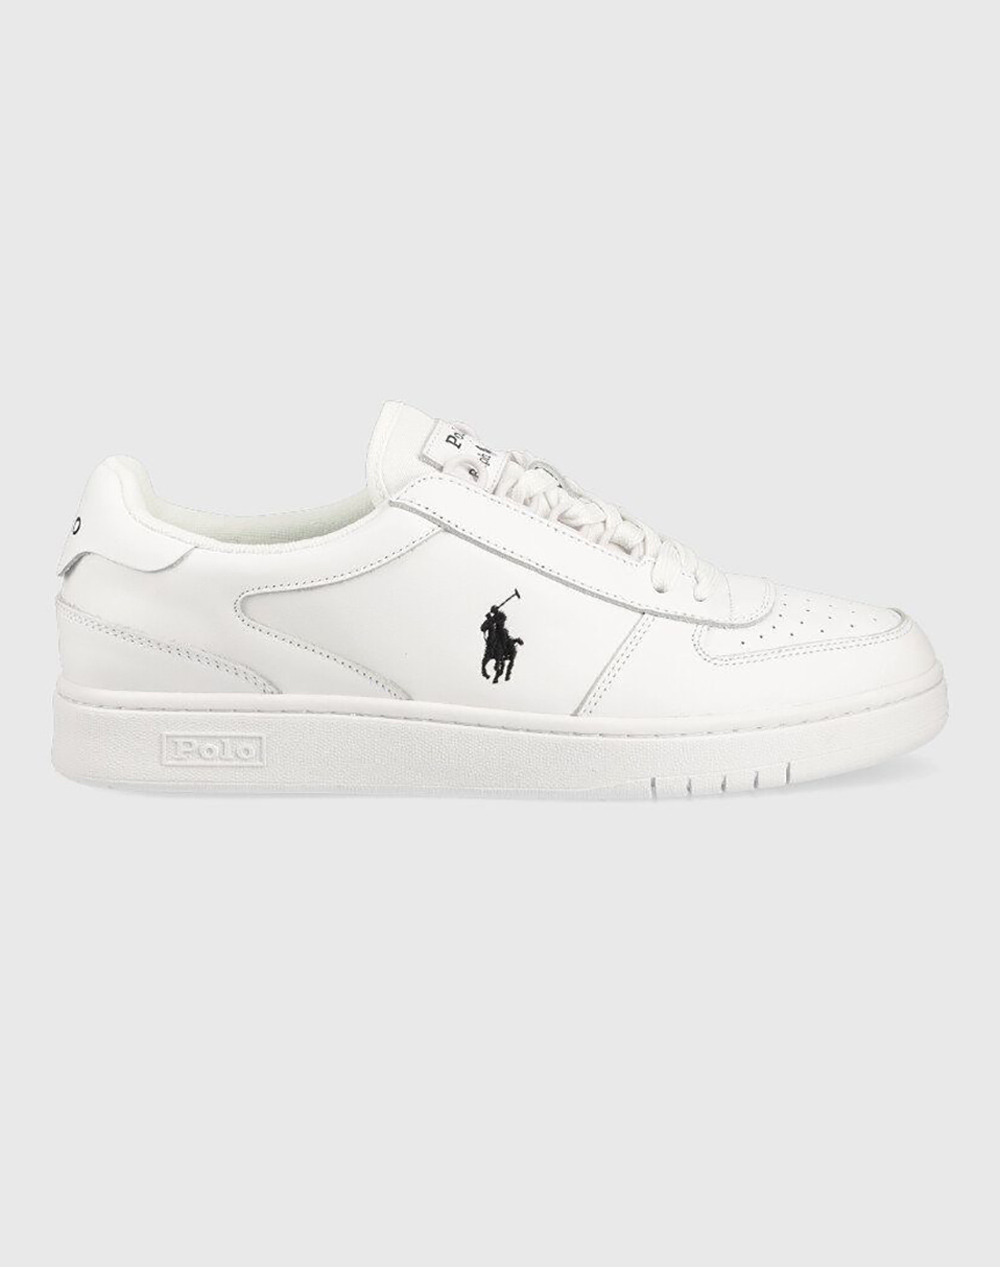 Polo Ralph Lauren heritage court leather sneakers in black with pony logo -  ShopStyle